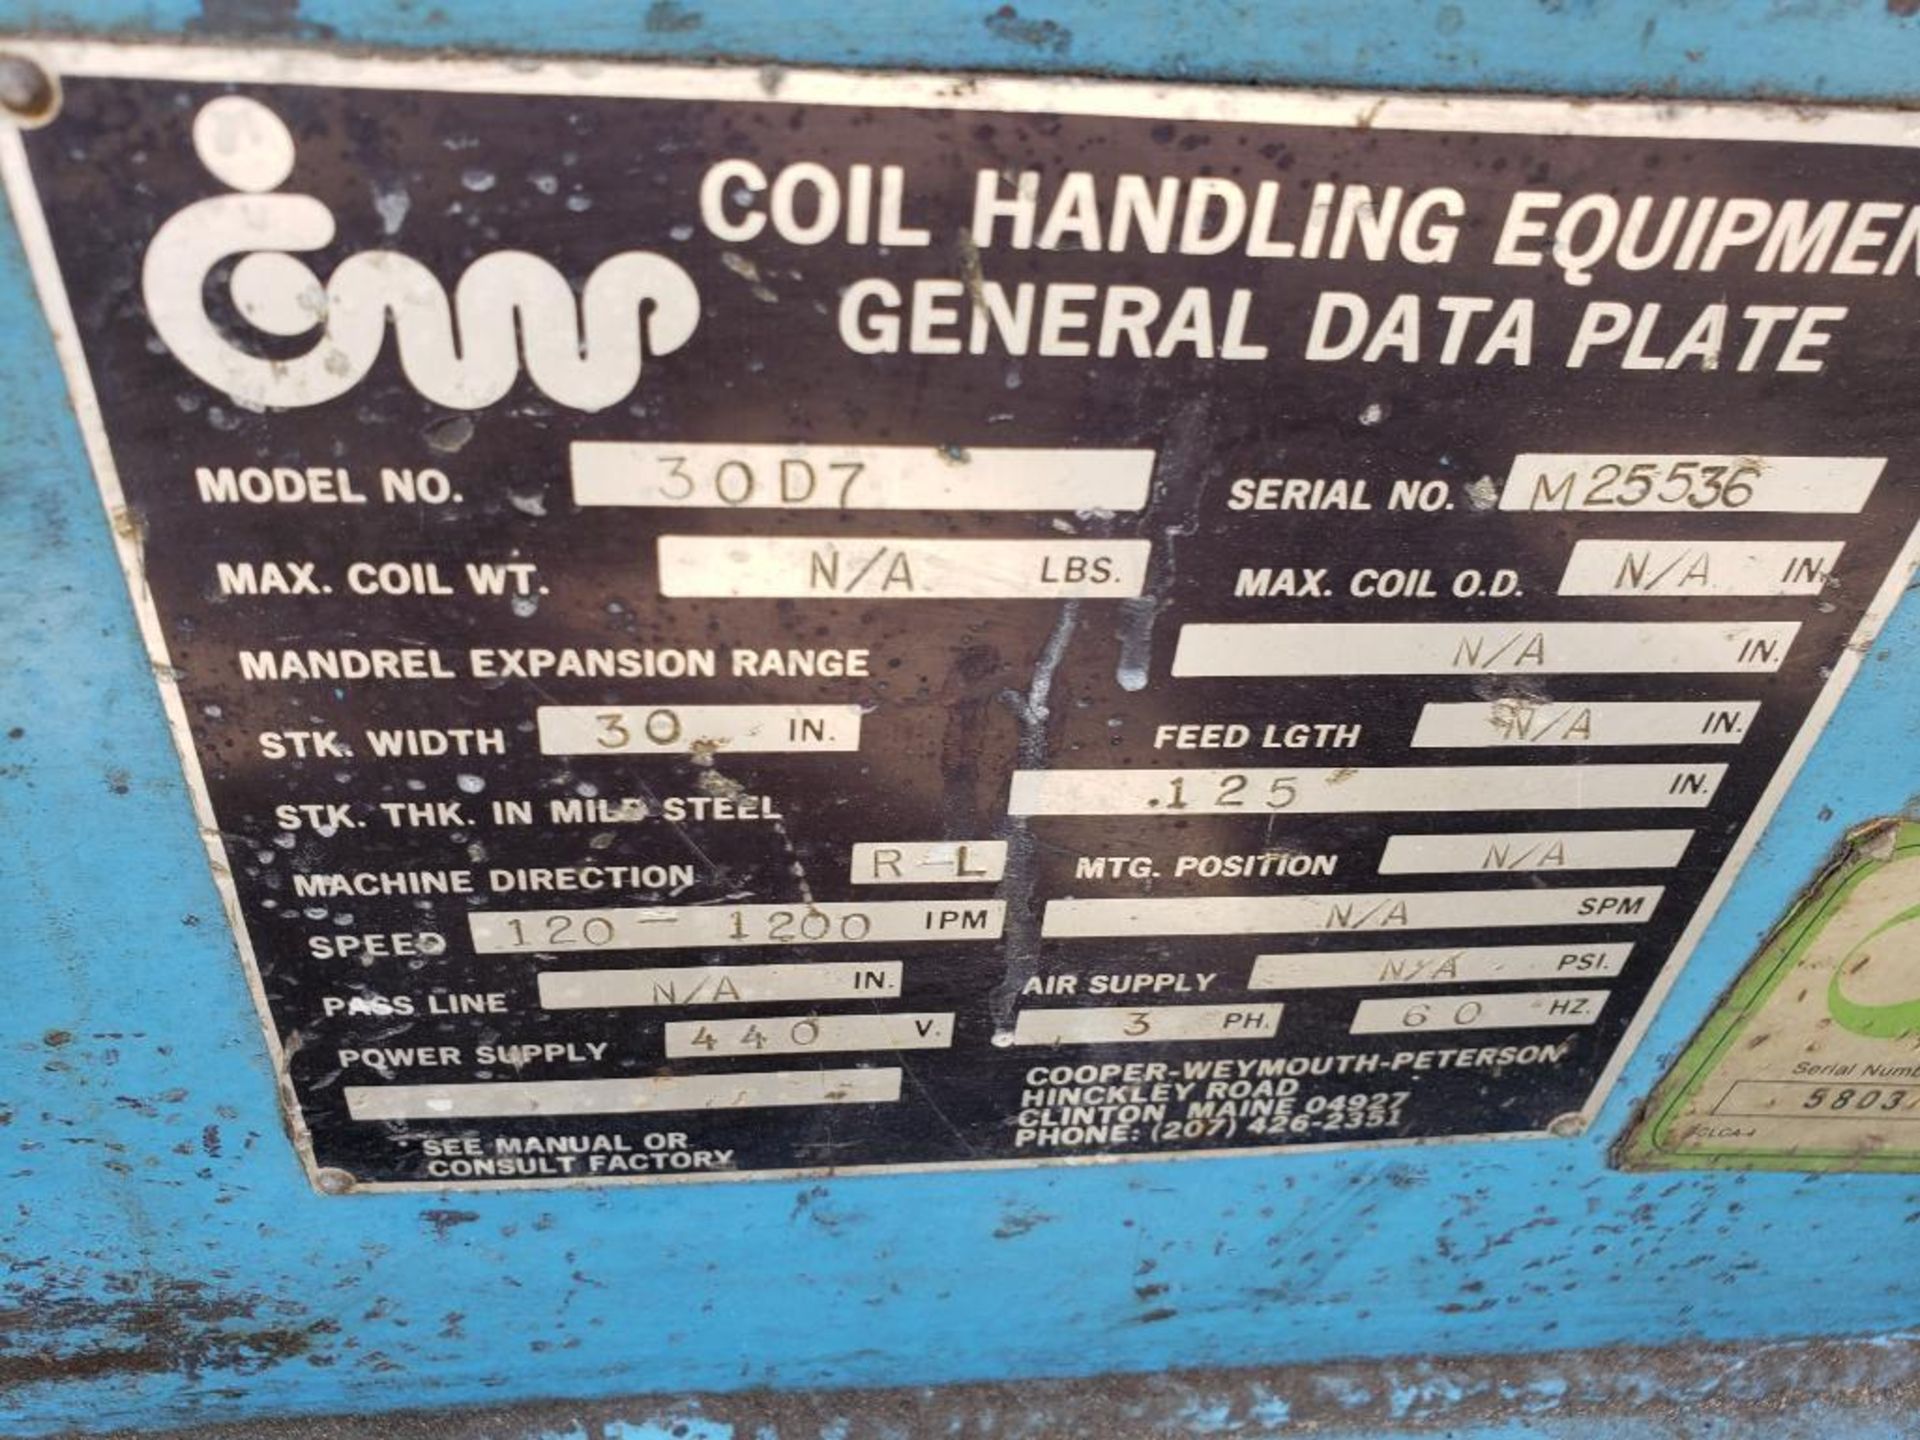 CMP coil handling equipment. Model 30D7 outfeed unit. - Image 4 of 18